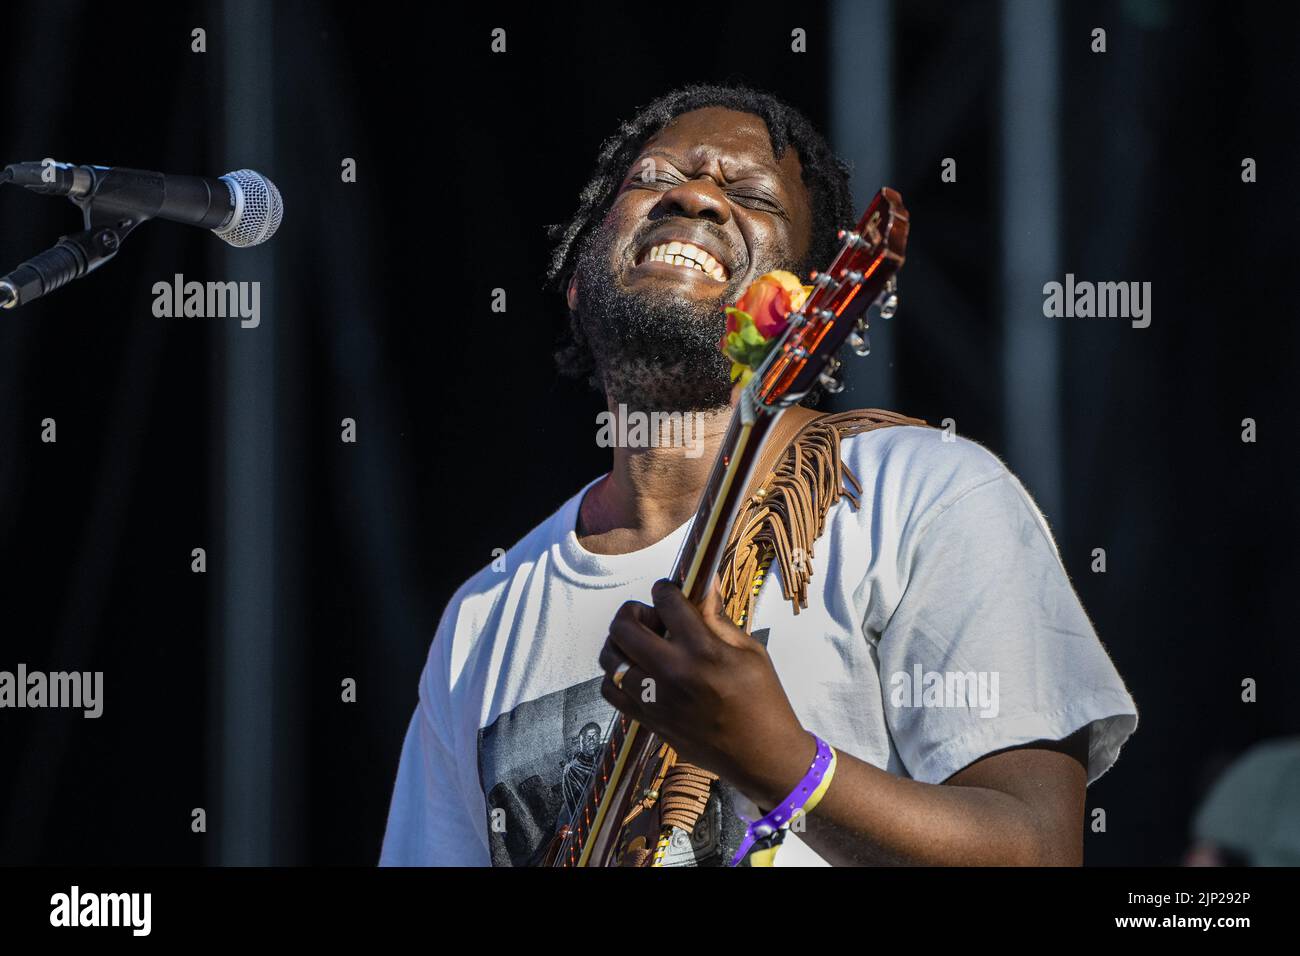 Michael Kiwanuka performs during Swedish music festival Way Out West 2022 in Gothenburg, Sweden, August 12, 2022.Photo: Anders Deros / Aftonbladet / T Stock Photo